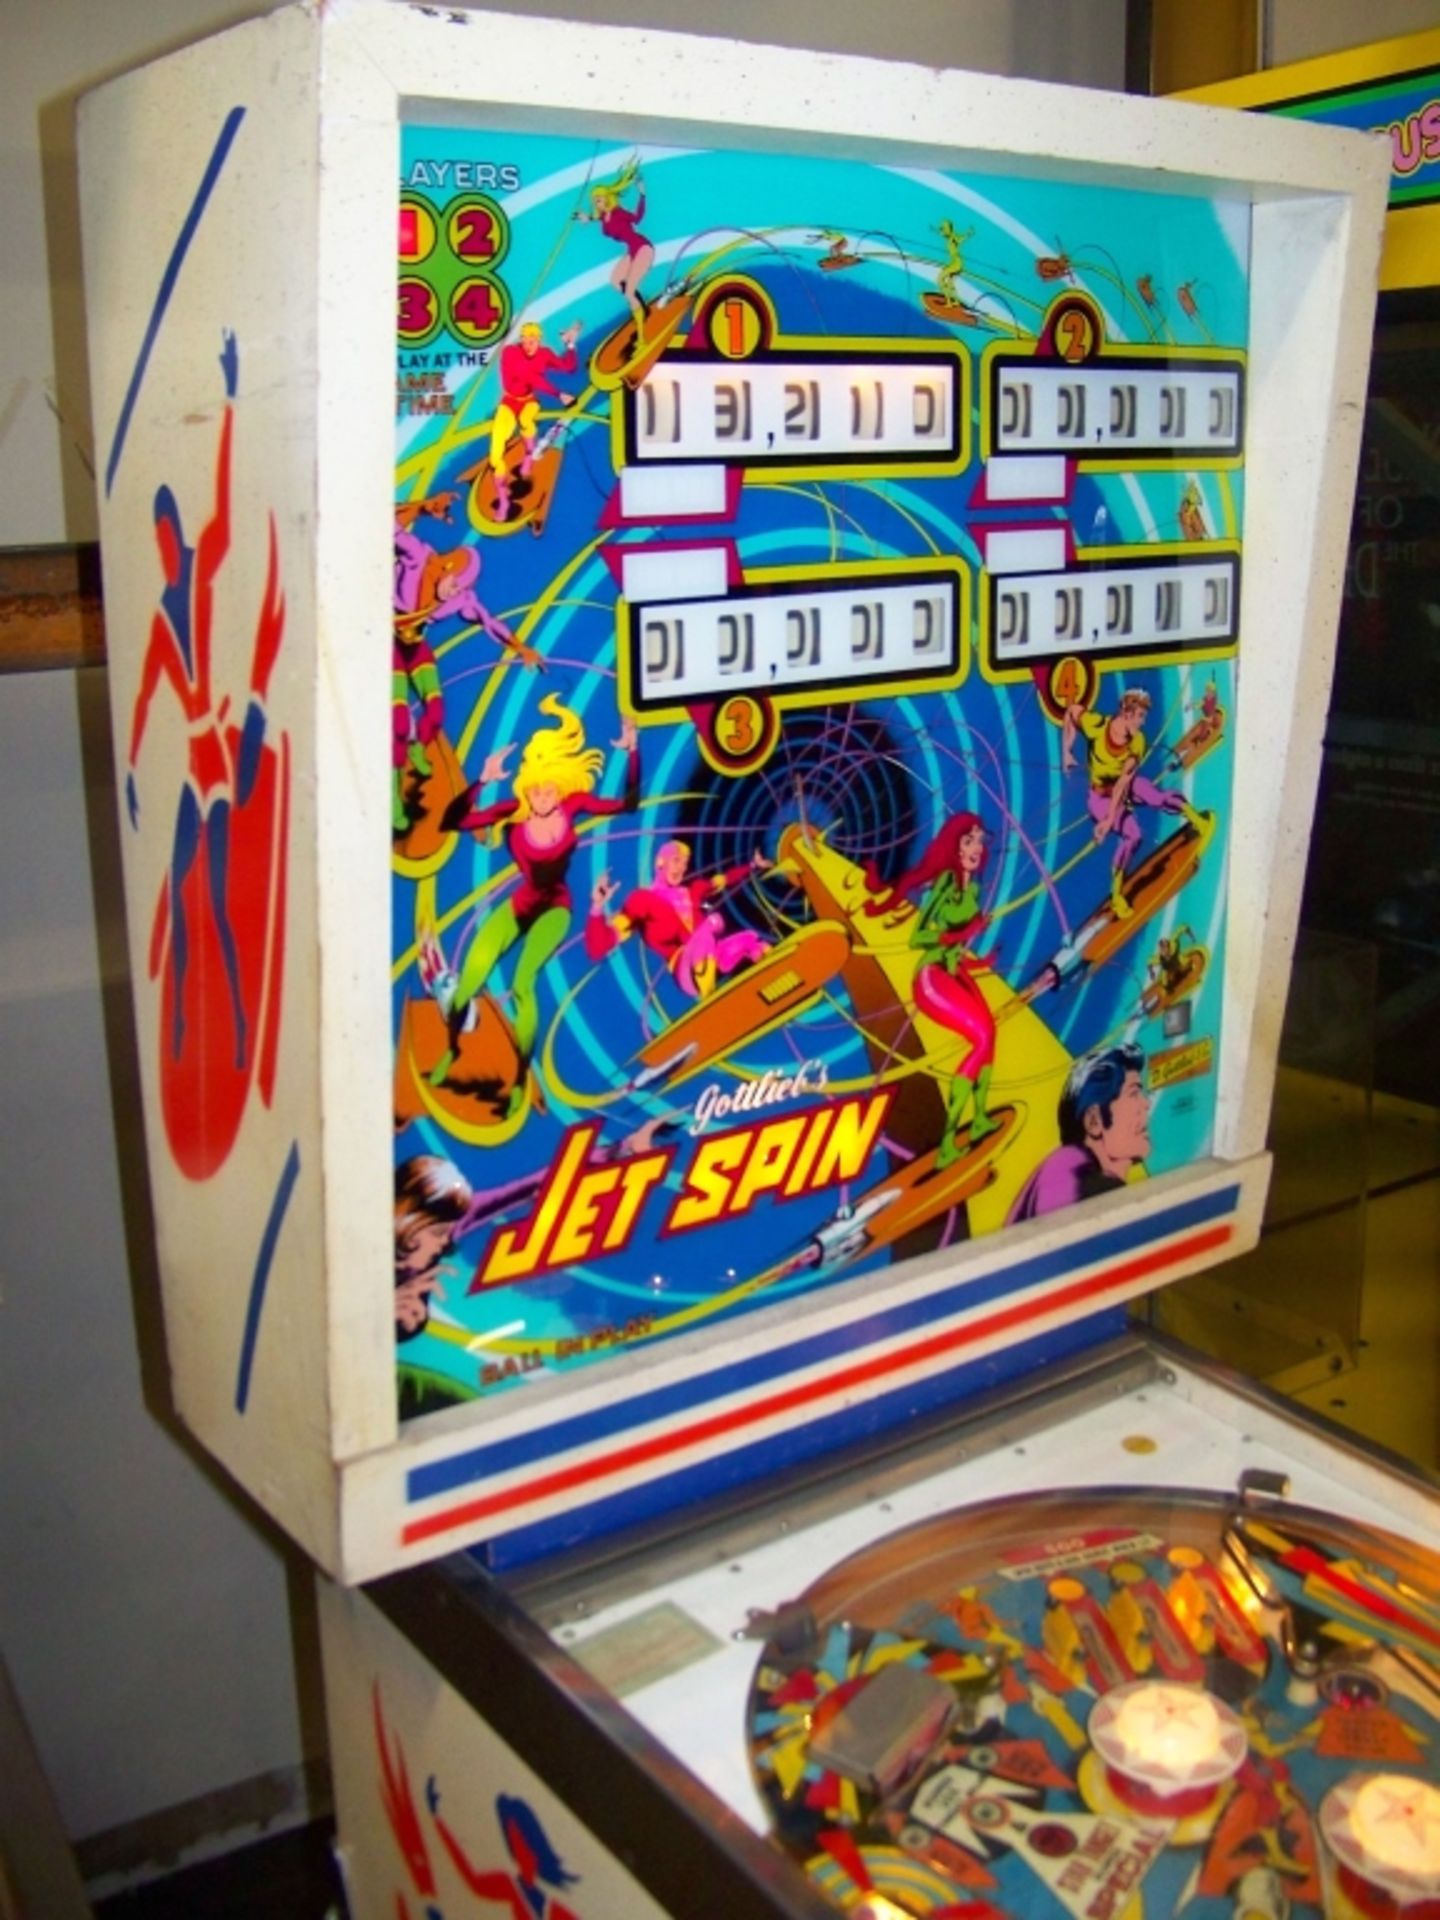 JET SPIN PINBALL MACHINE GOTTLIEB 1977 Item is in used condition. Evidence of wear and commercial - Image 2 of 8